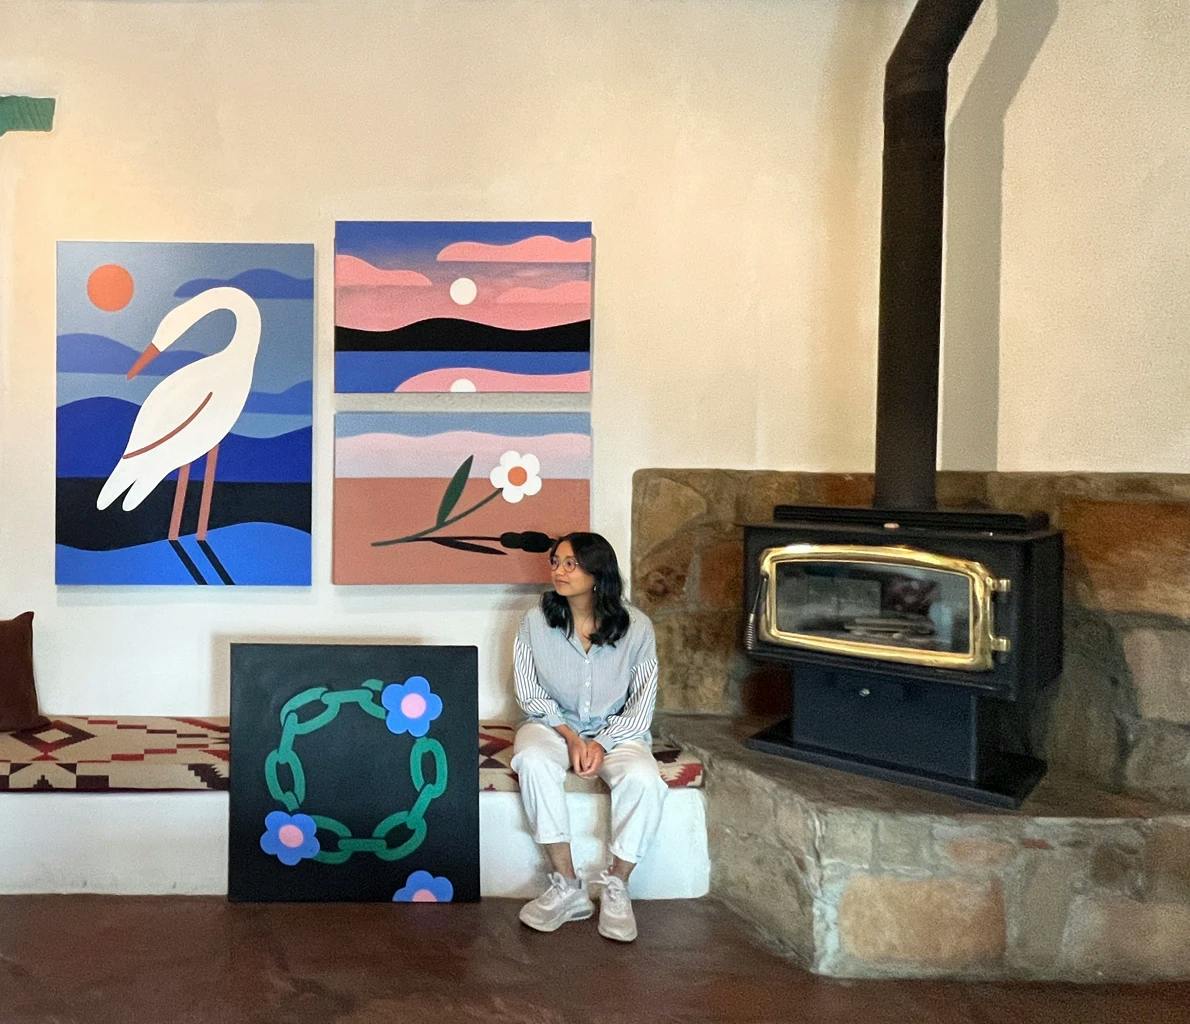 The artist Paulina Ho sits next to a fireplace surrounded by three of her large paintings depicting a crane, a sunset, and a daisy chain. 